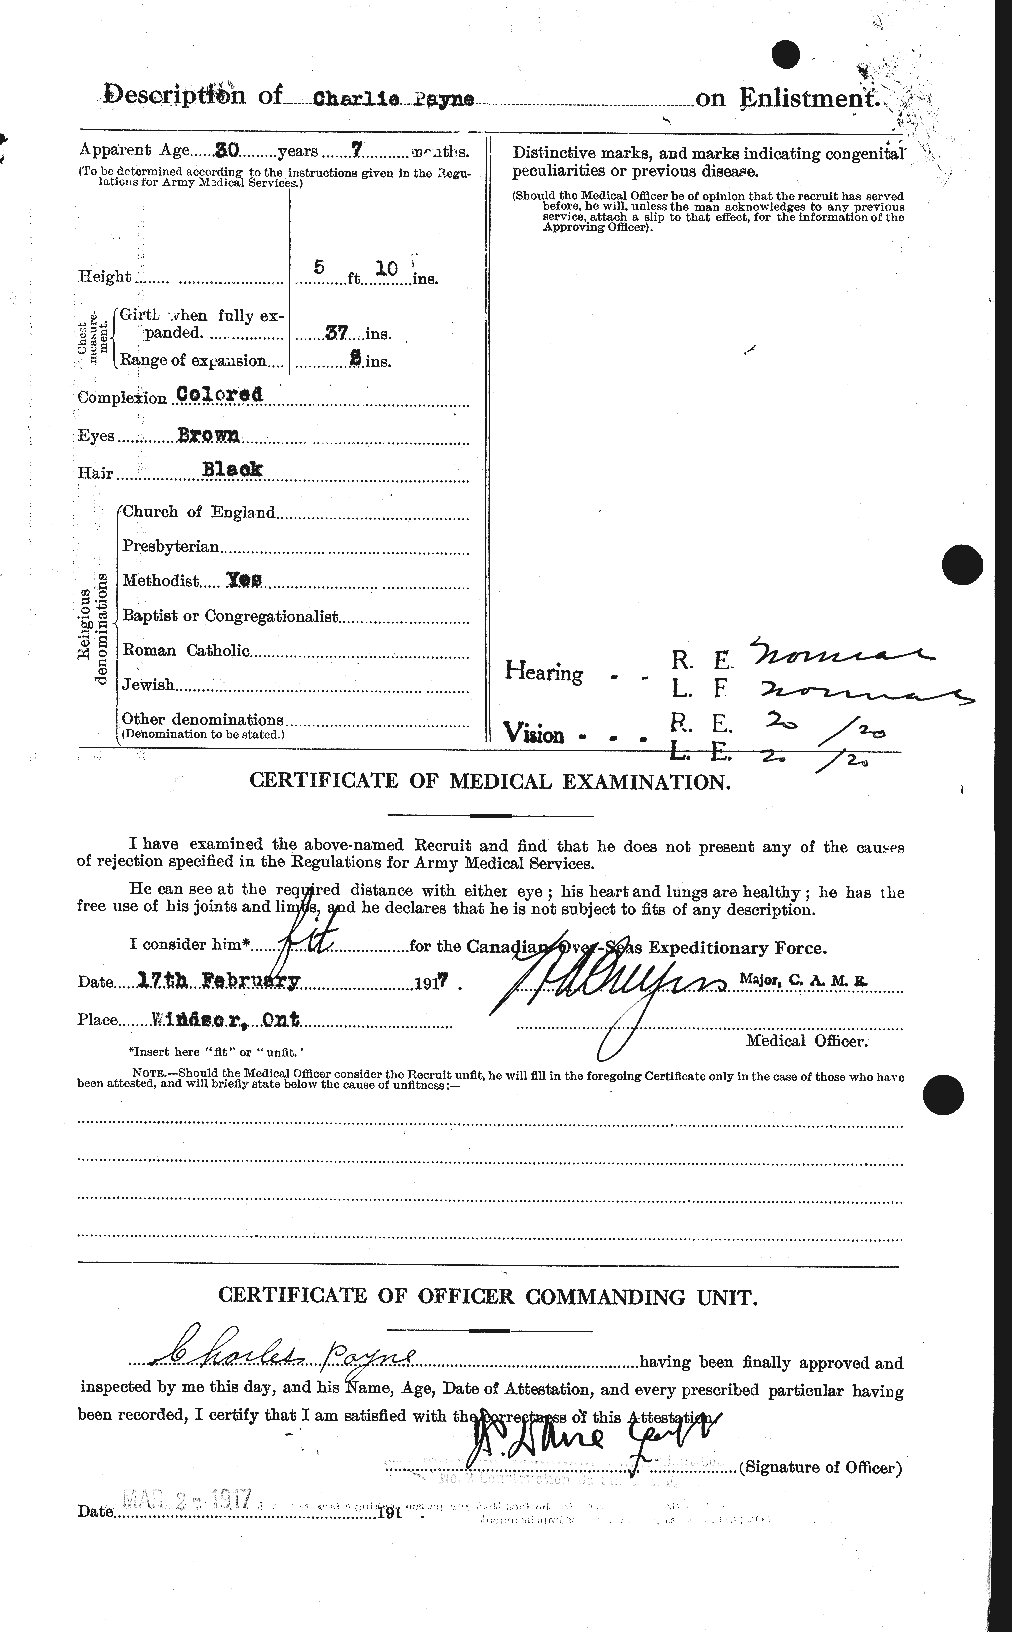 Personnel Records of the First World War - CEF 569860b